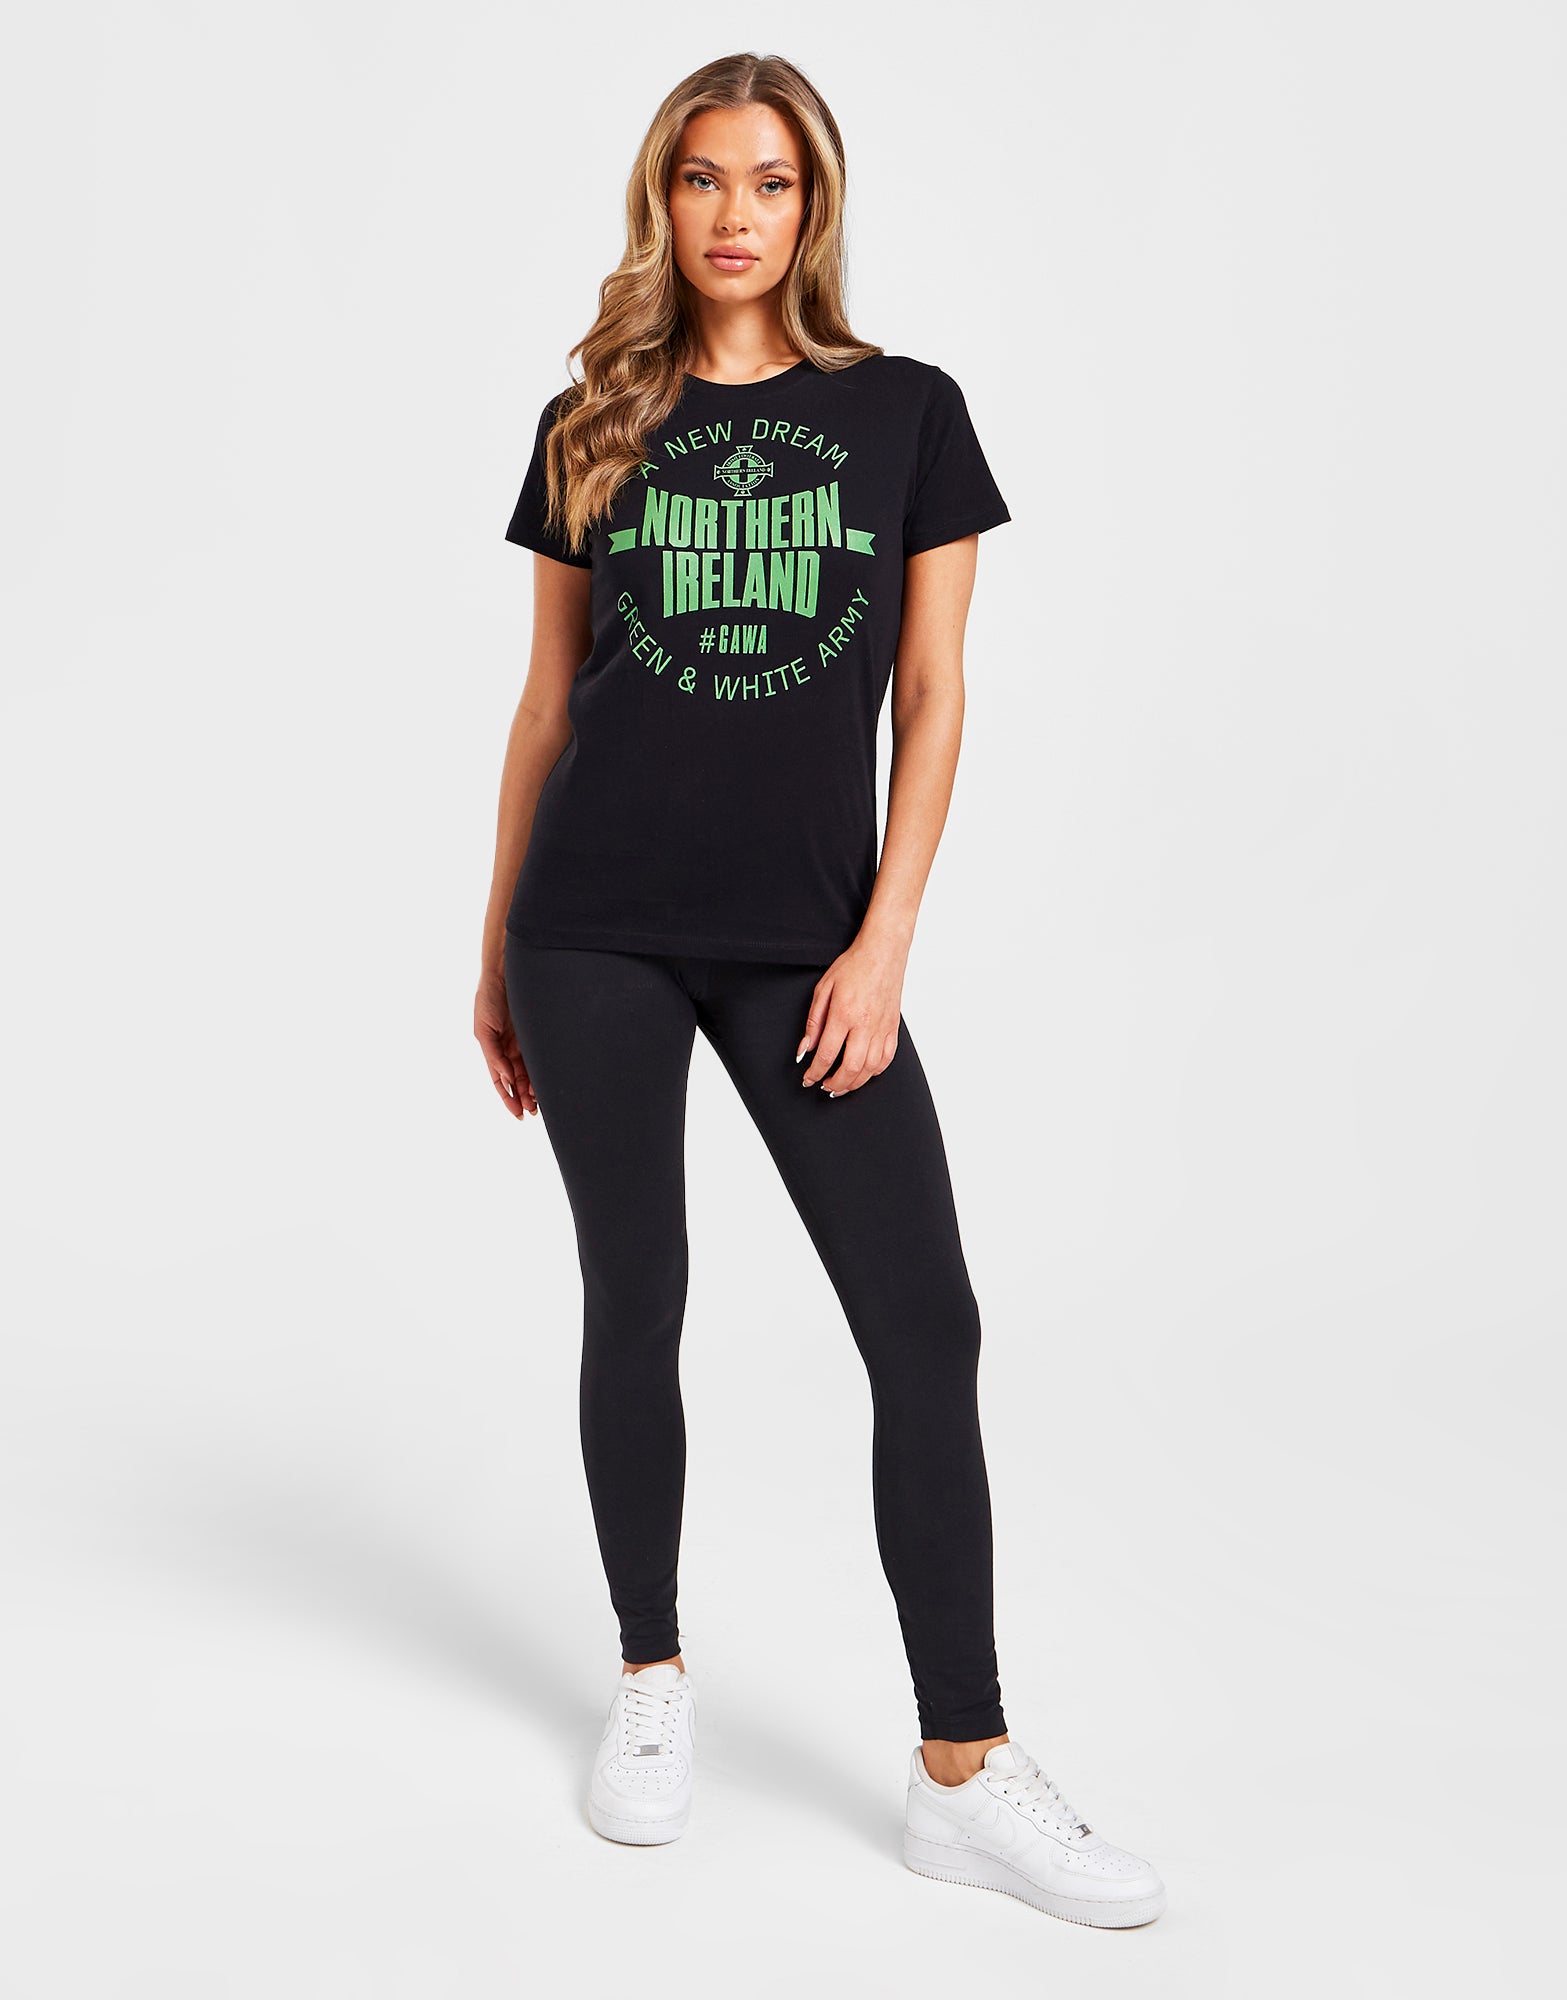 Official Northern Ireland Graphic T-Shirt Womens - Black - The World Football Store